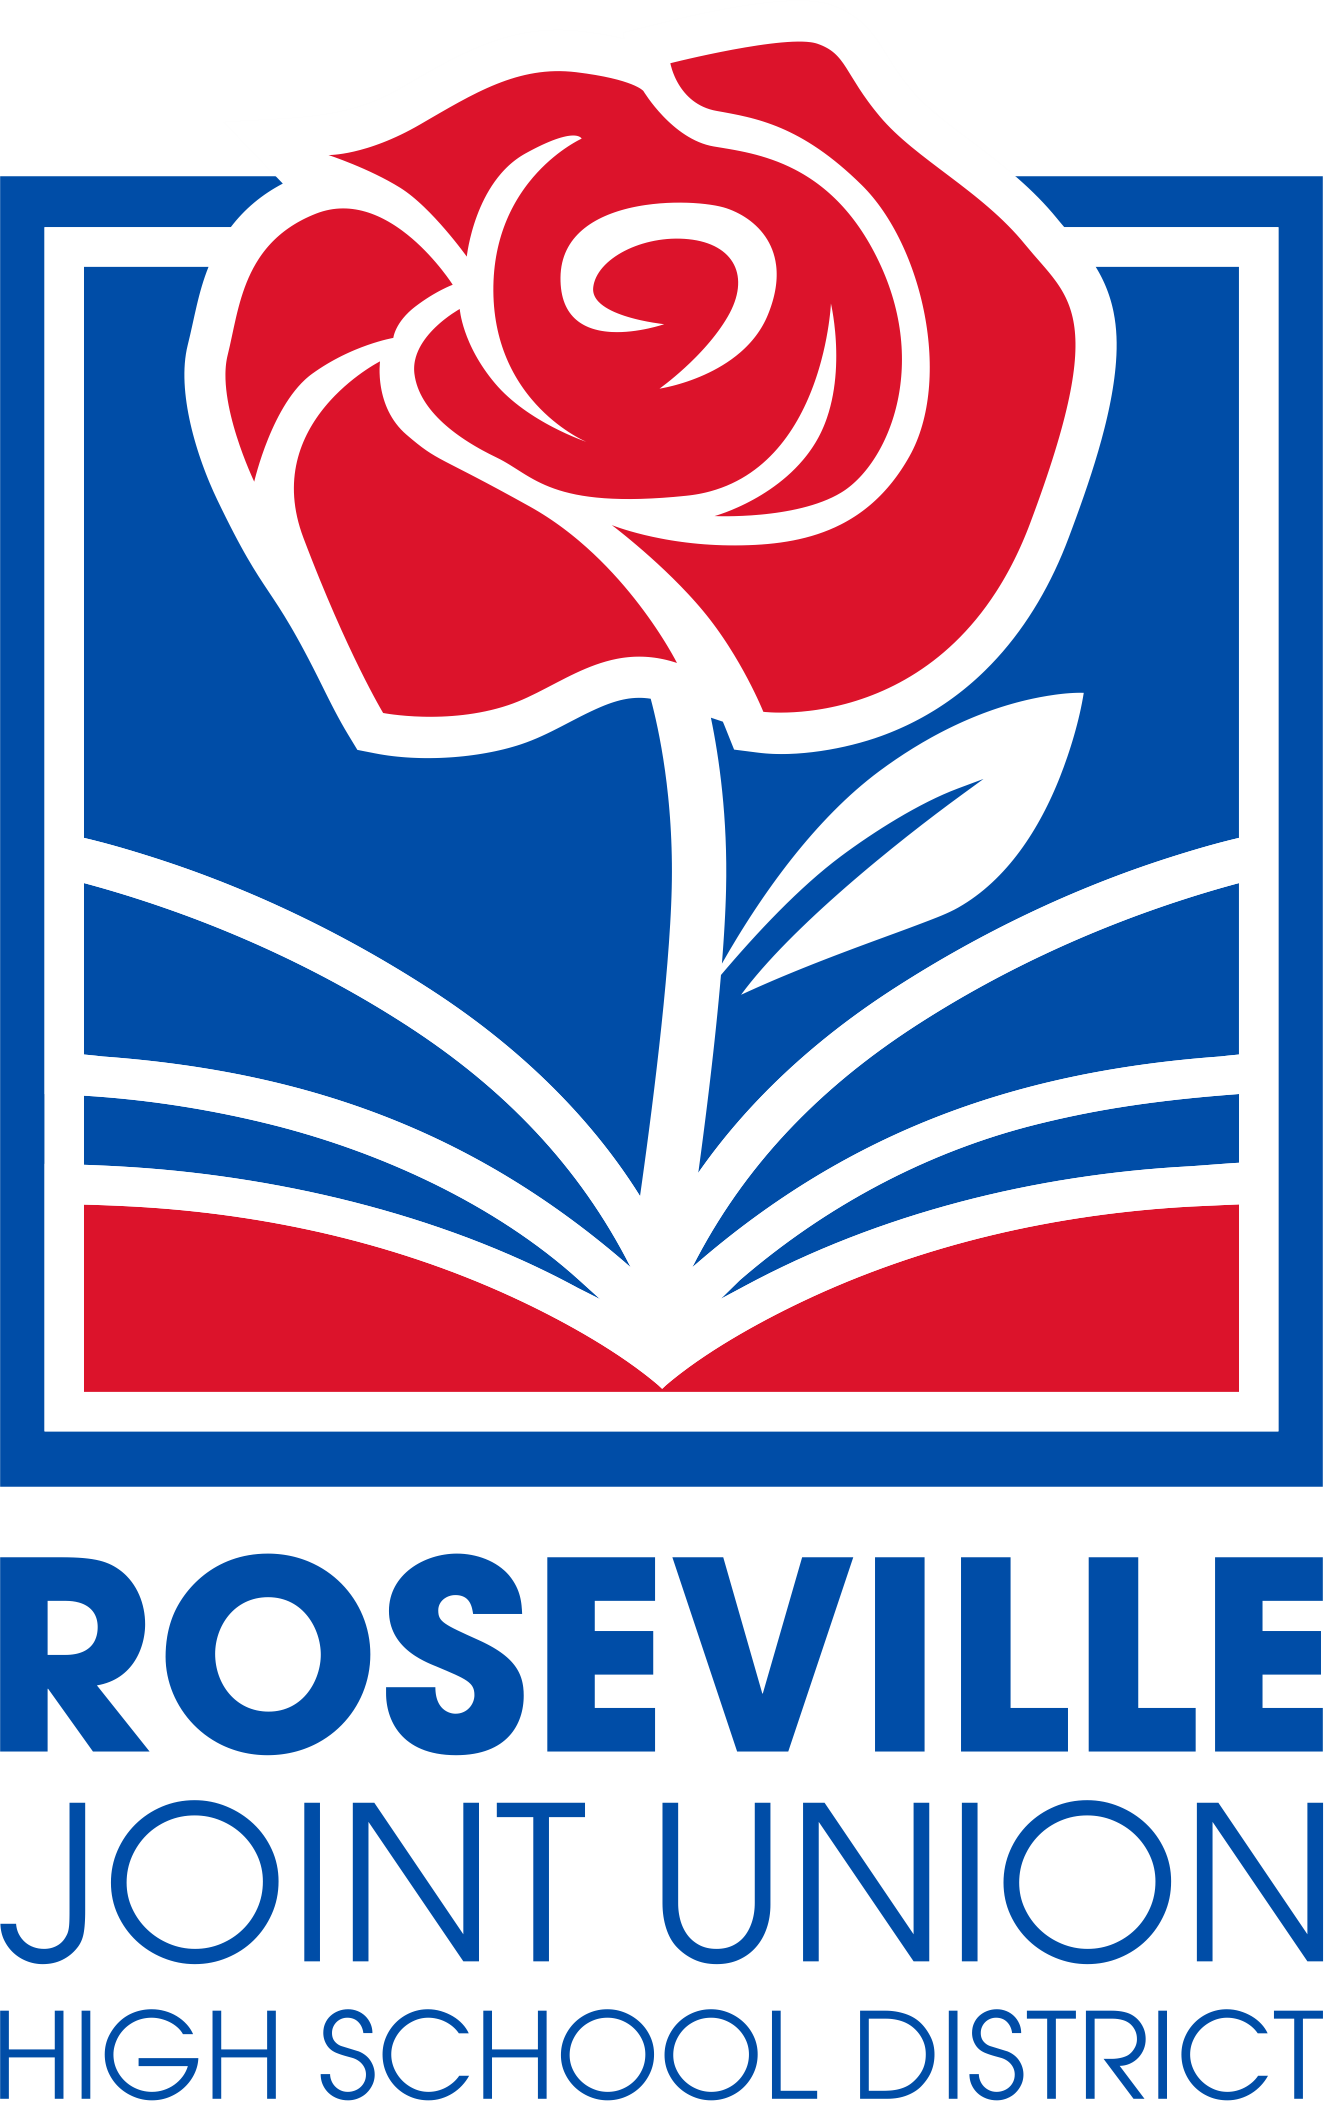 Roseville Joint Union High School District